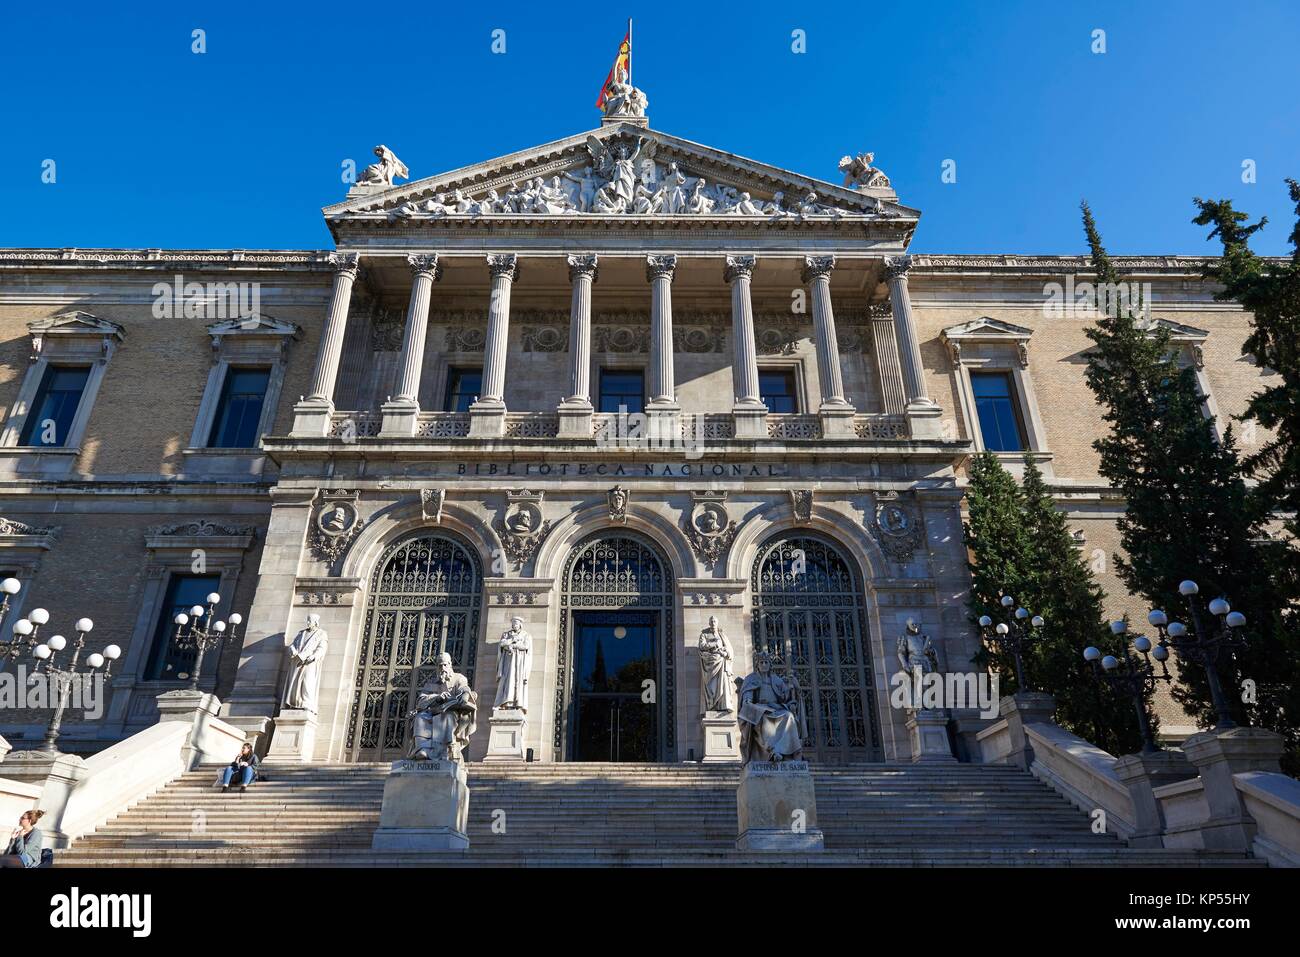 National Library of Madrid, Paseo de Recoletos, Spain. Europe, architecture and art. Stock Photo